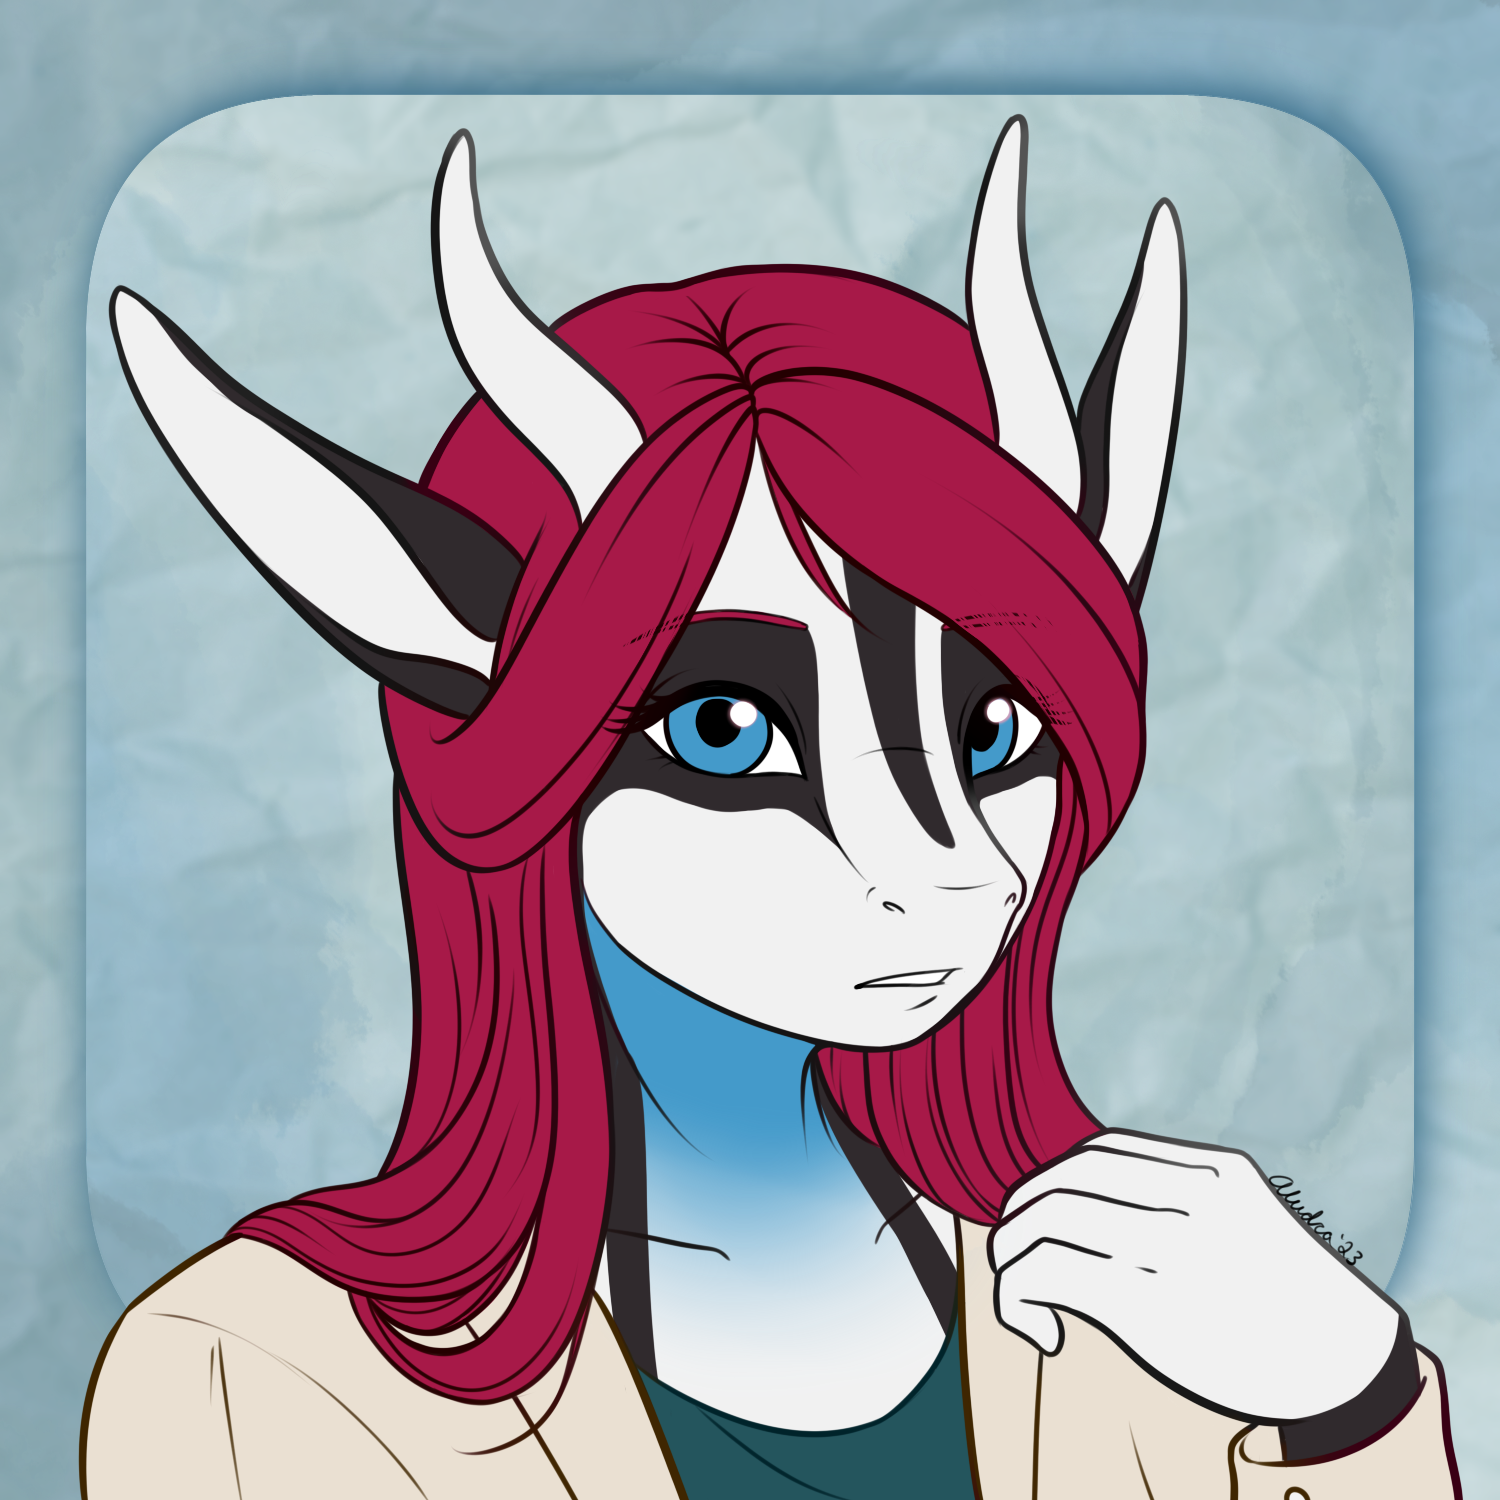 An unshaded headshot of Crimson, which I use for an art reference to see her colors.